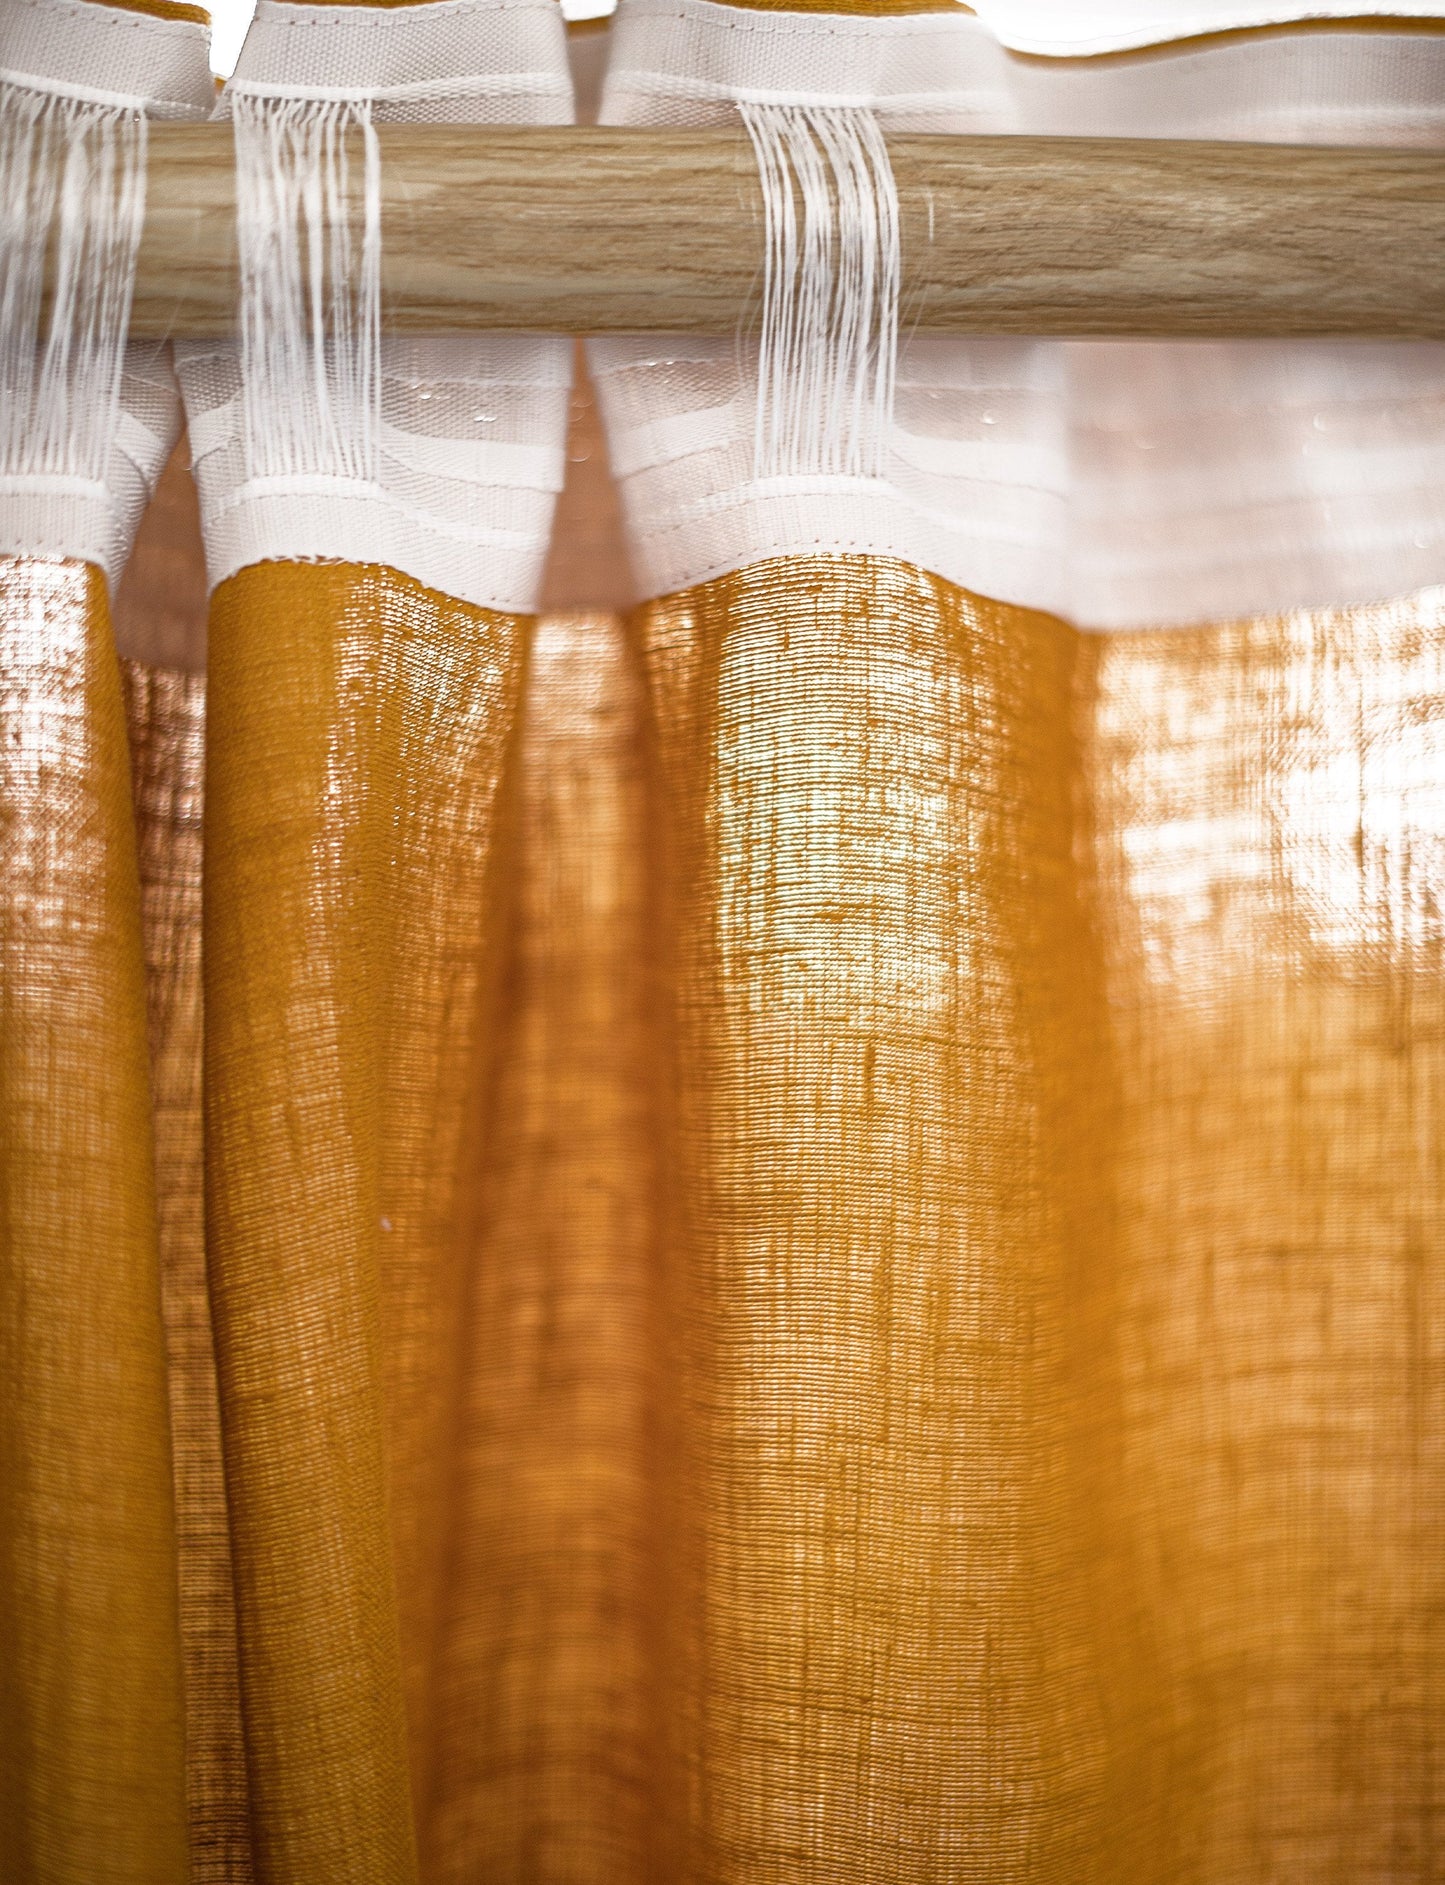 Linen Curtains & Drapes with Multi-functional Heading Tape in Greyish